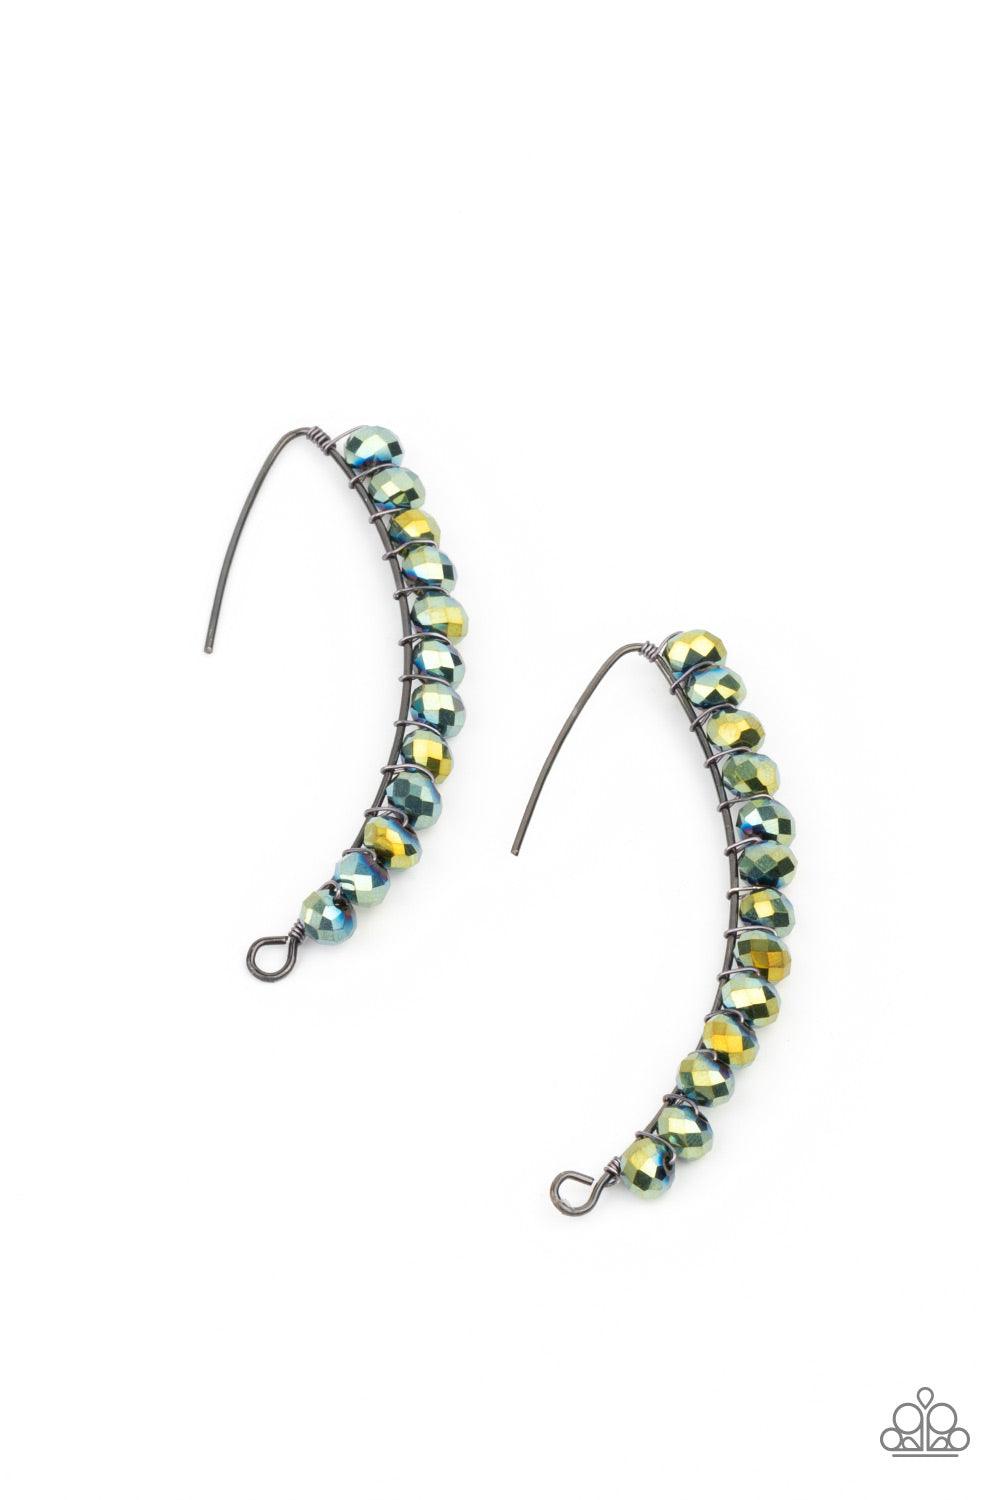 Paparazzi Accessories GLOW Hanging Fruit - Multi A glittery collection of iridescent flecked metallic blue rhinestones are fitted in place along a curved gunmetal wire, creating a glamorous hanging post. Earring attaches to a standard hanging post fitting